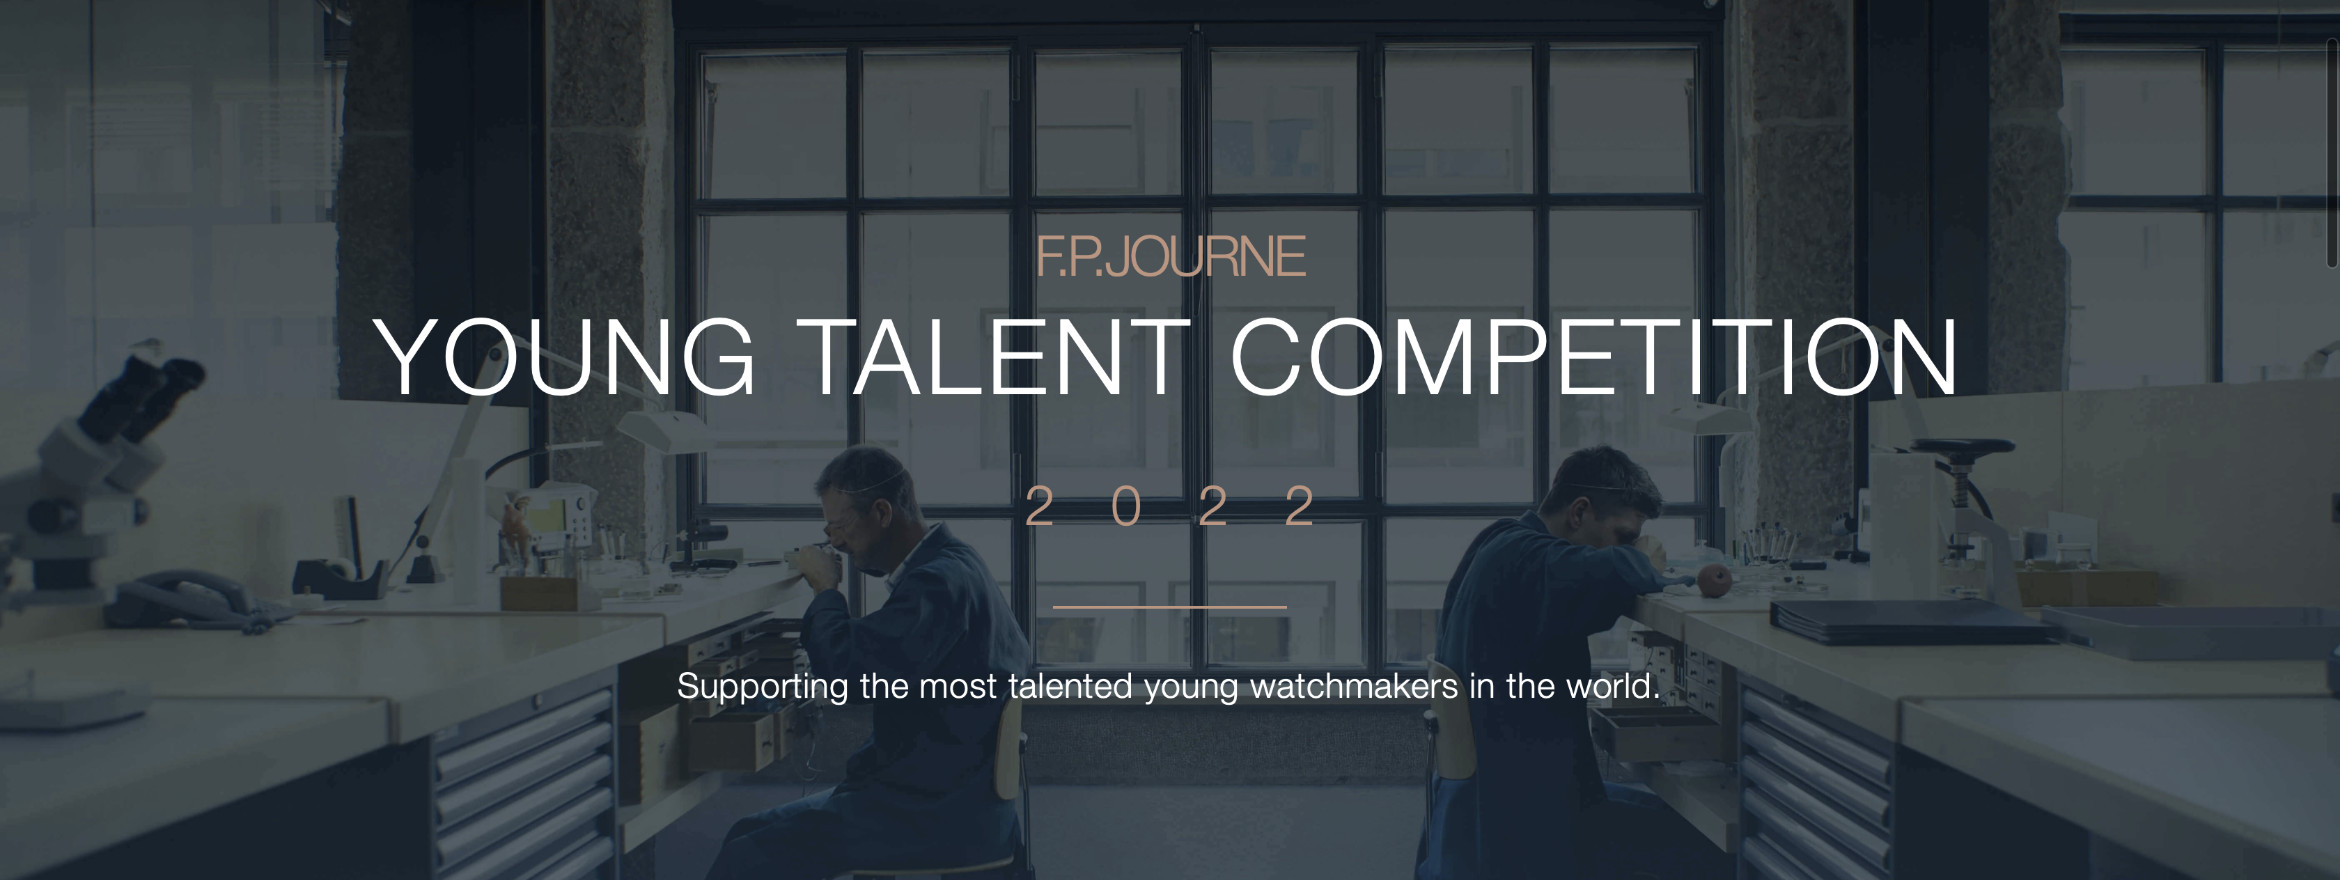 Open for Submissions – 2022 F.P.Journe Young Talent Competition